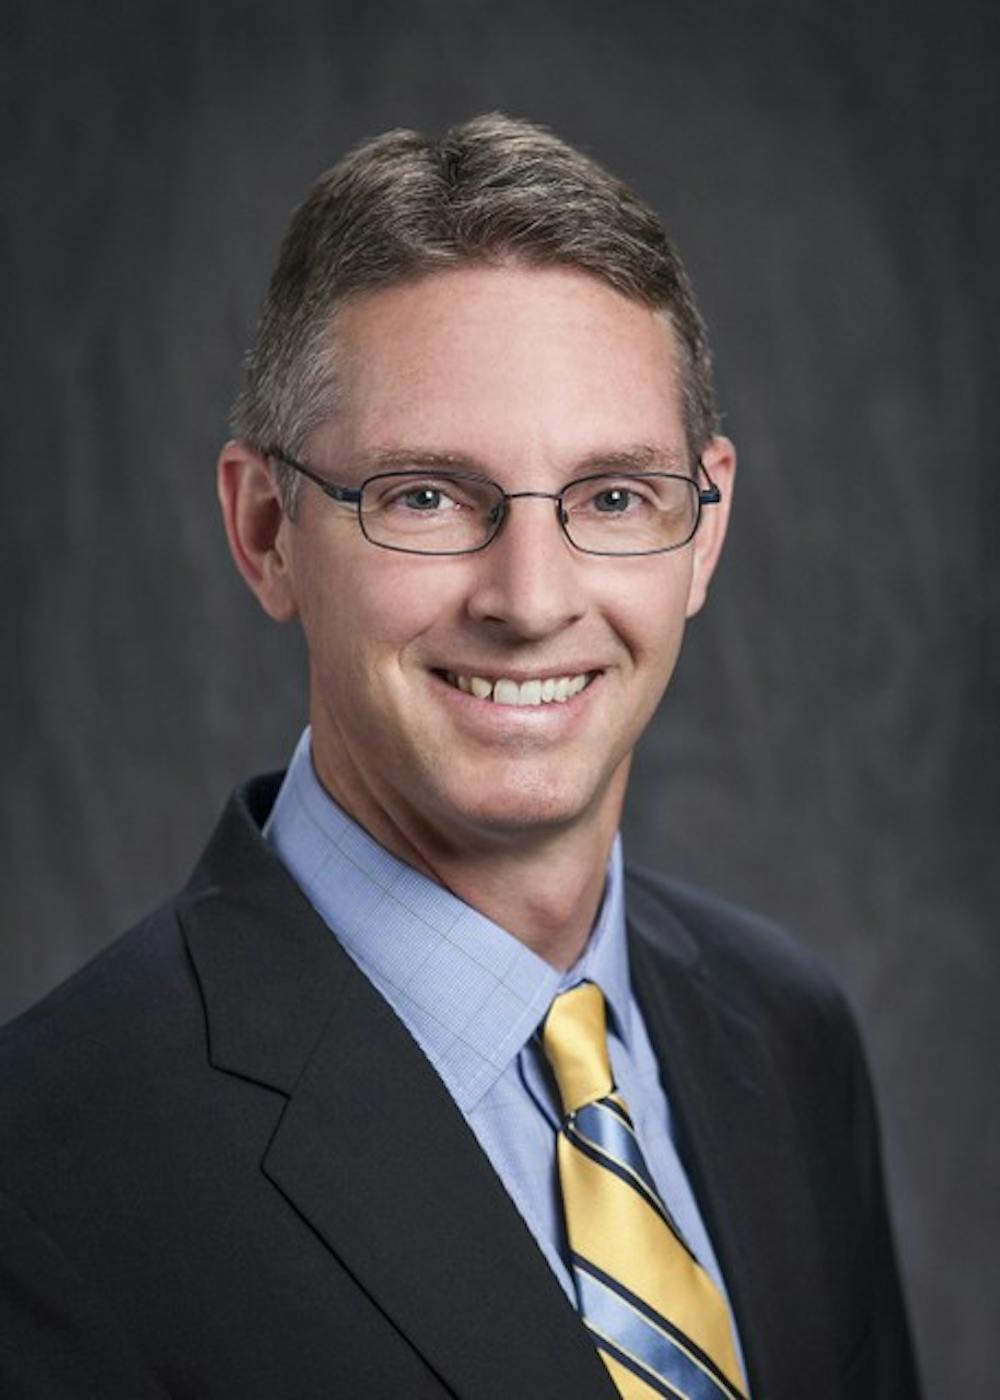 Auburn University has announced Jason Hicks to be the next dean of the College of Liberal Arts 